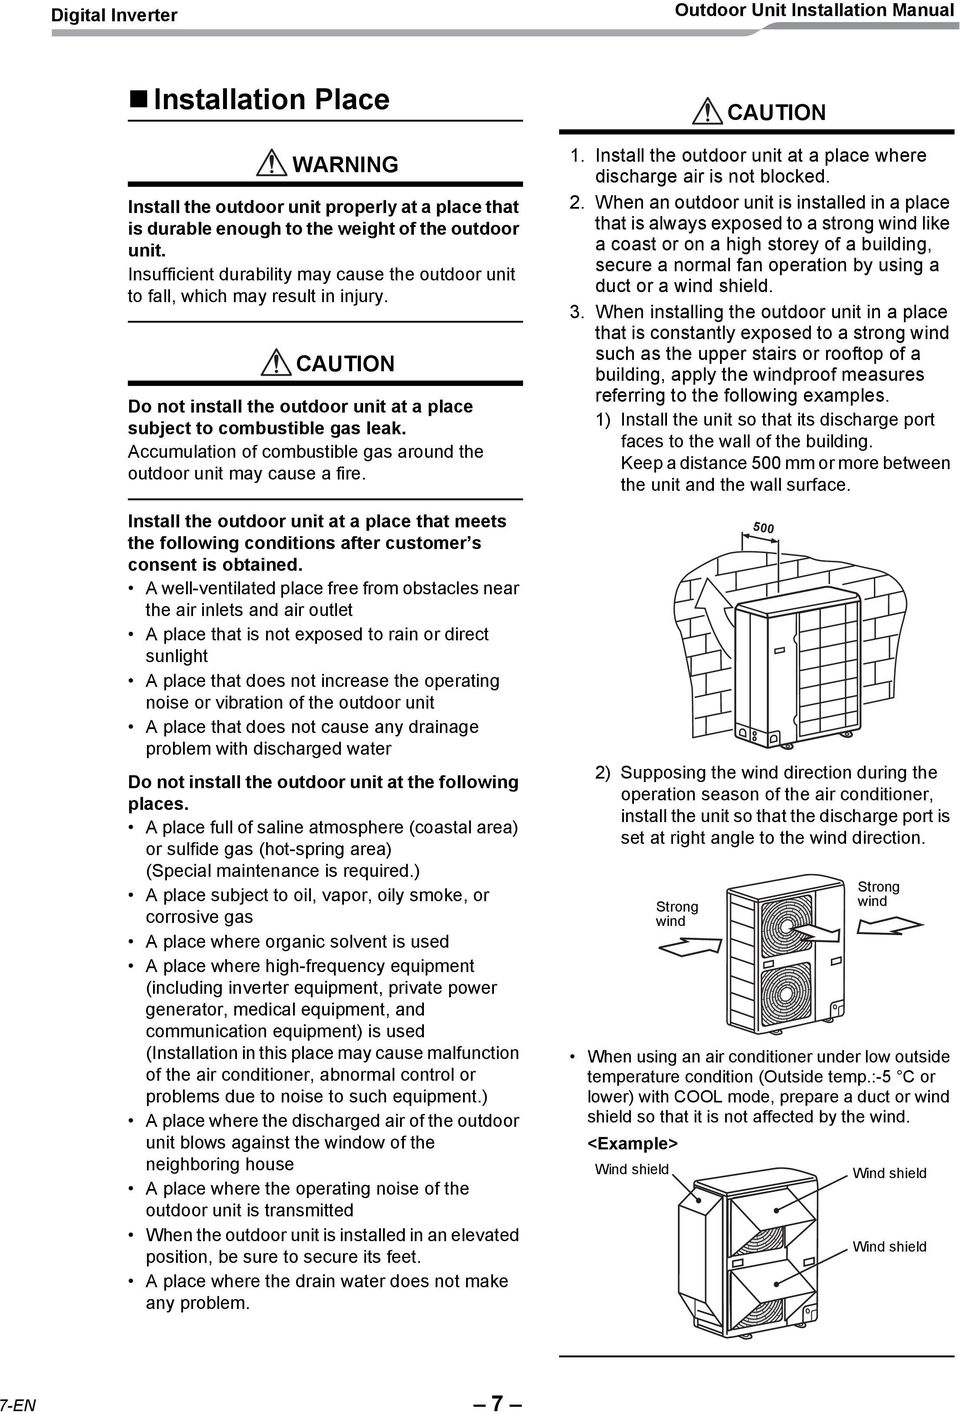 Accumulation of combustible gas around the outdoor unit may cause a fire. Install the outdoor unit at a place that meets the following conditions after customer s consent is obtained.